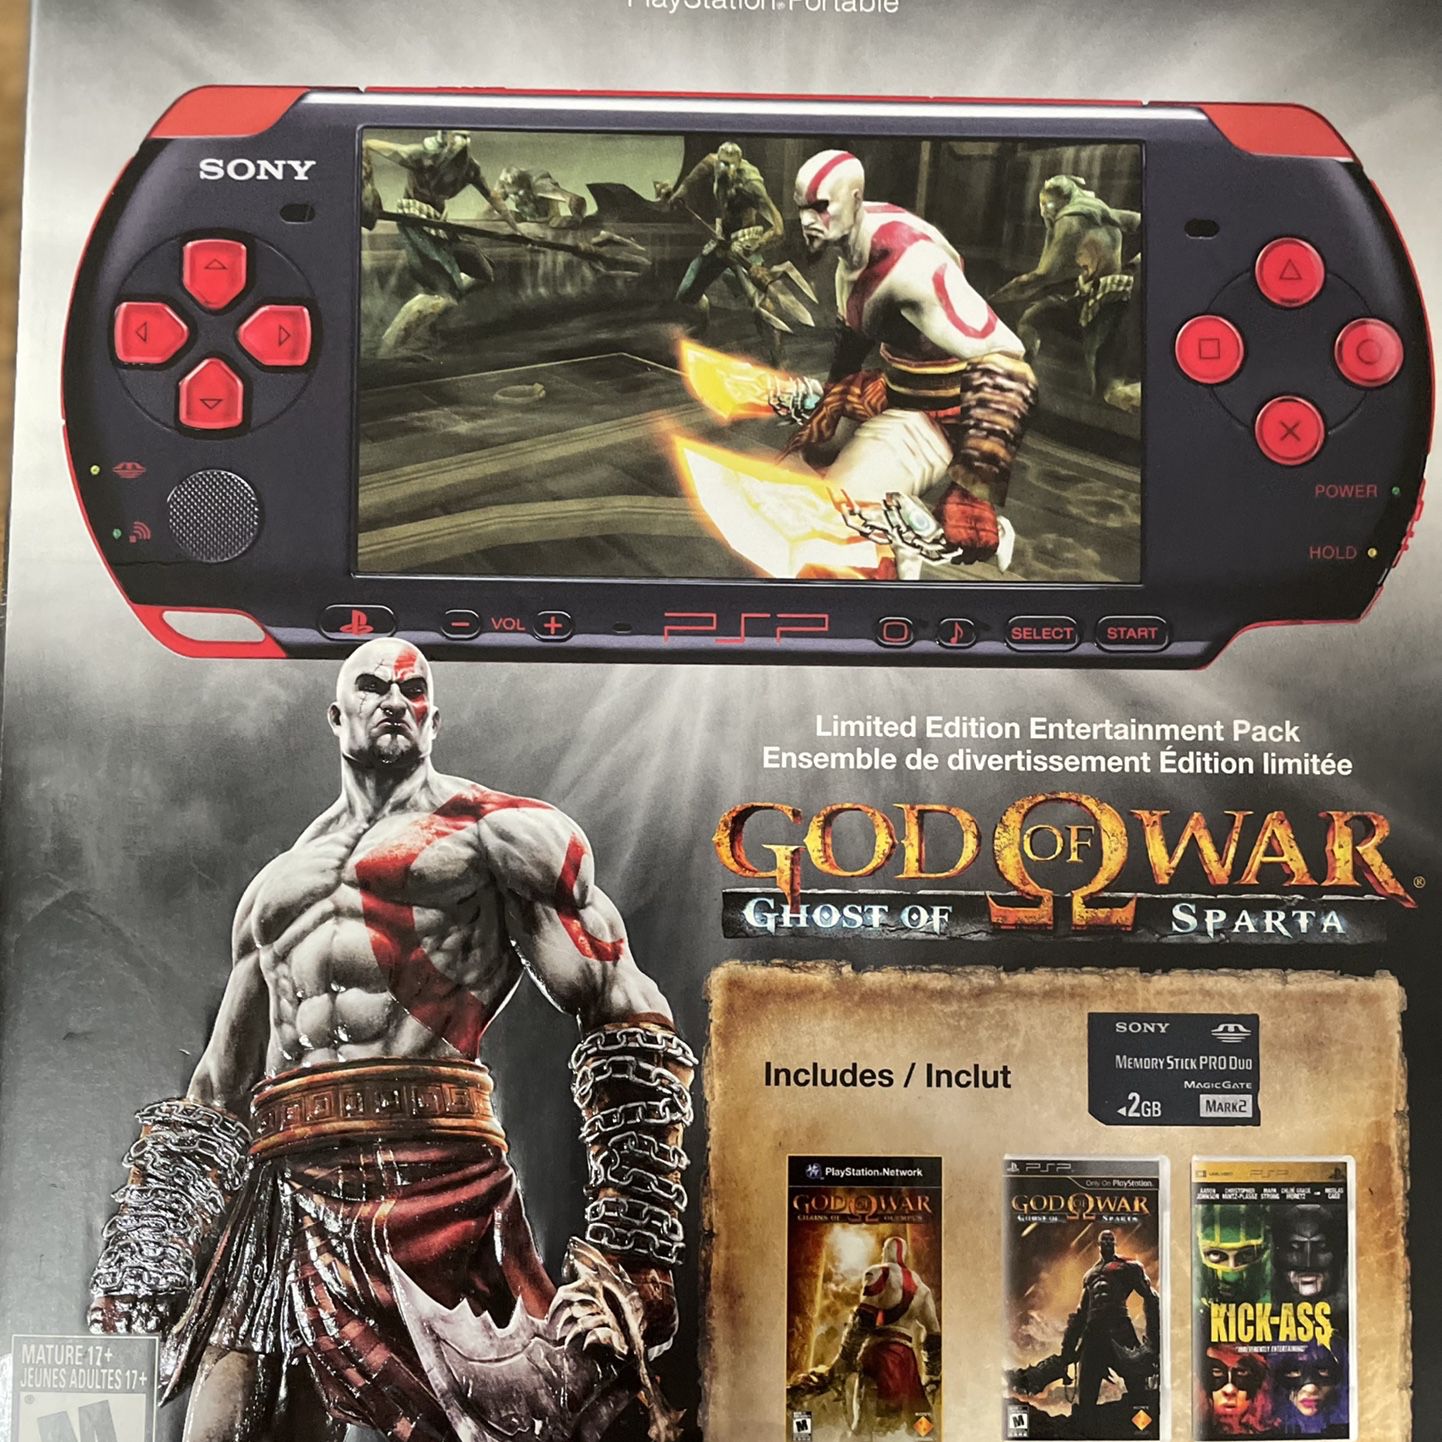 Buy God of War: Ghost of Sparta for PSP